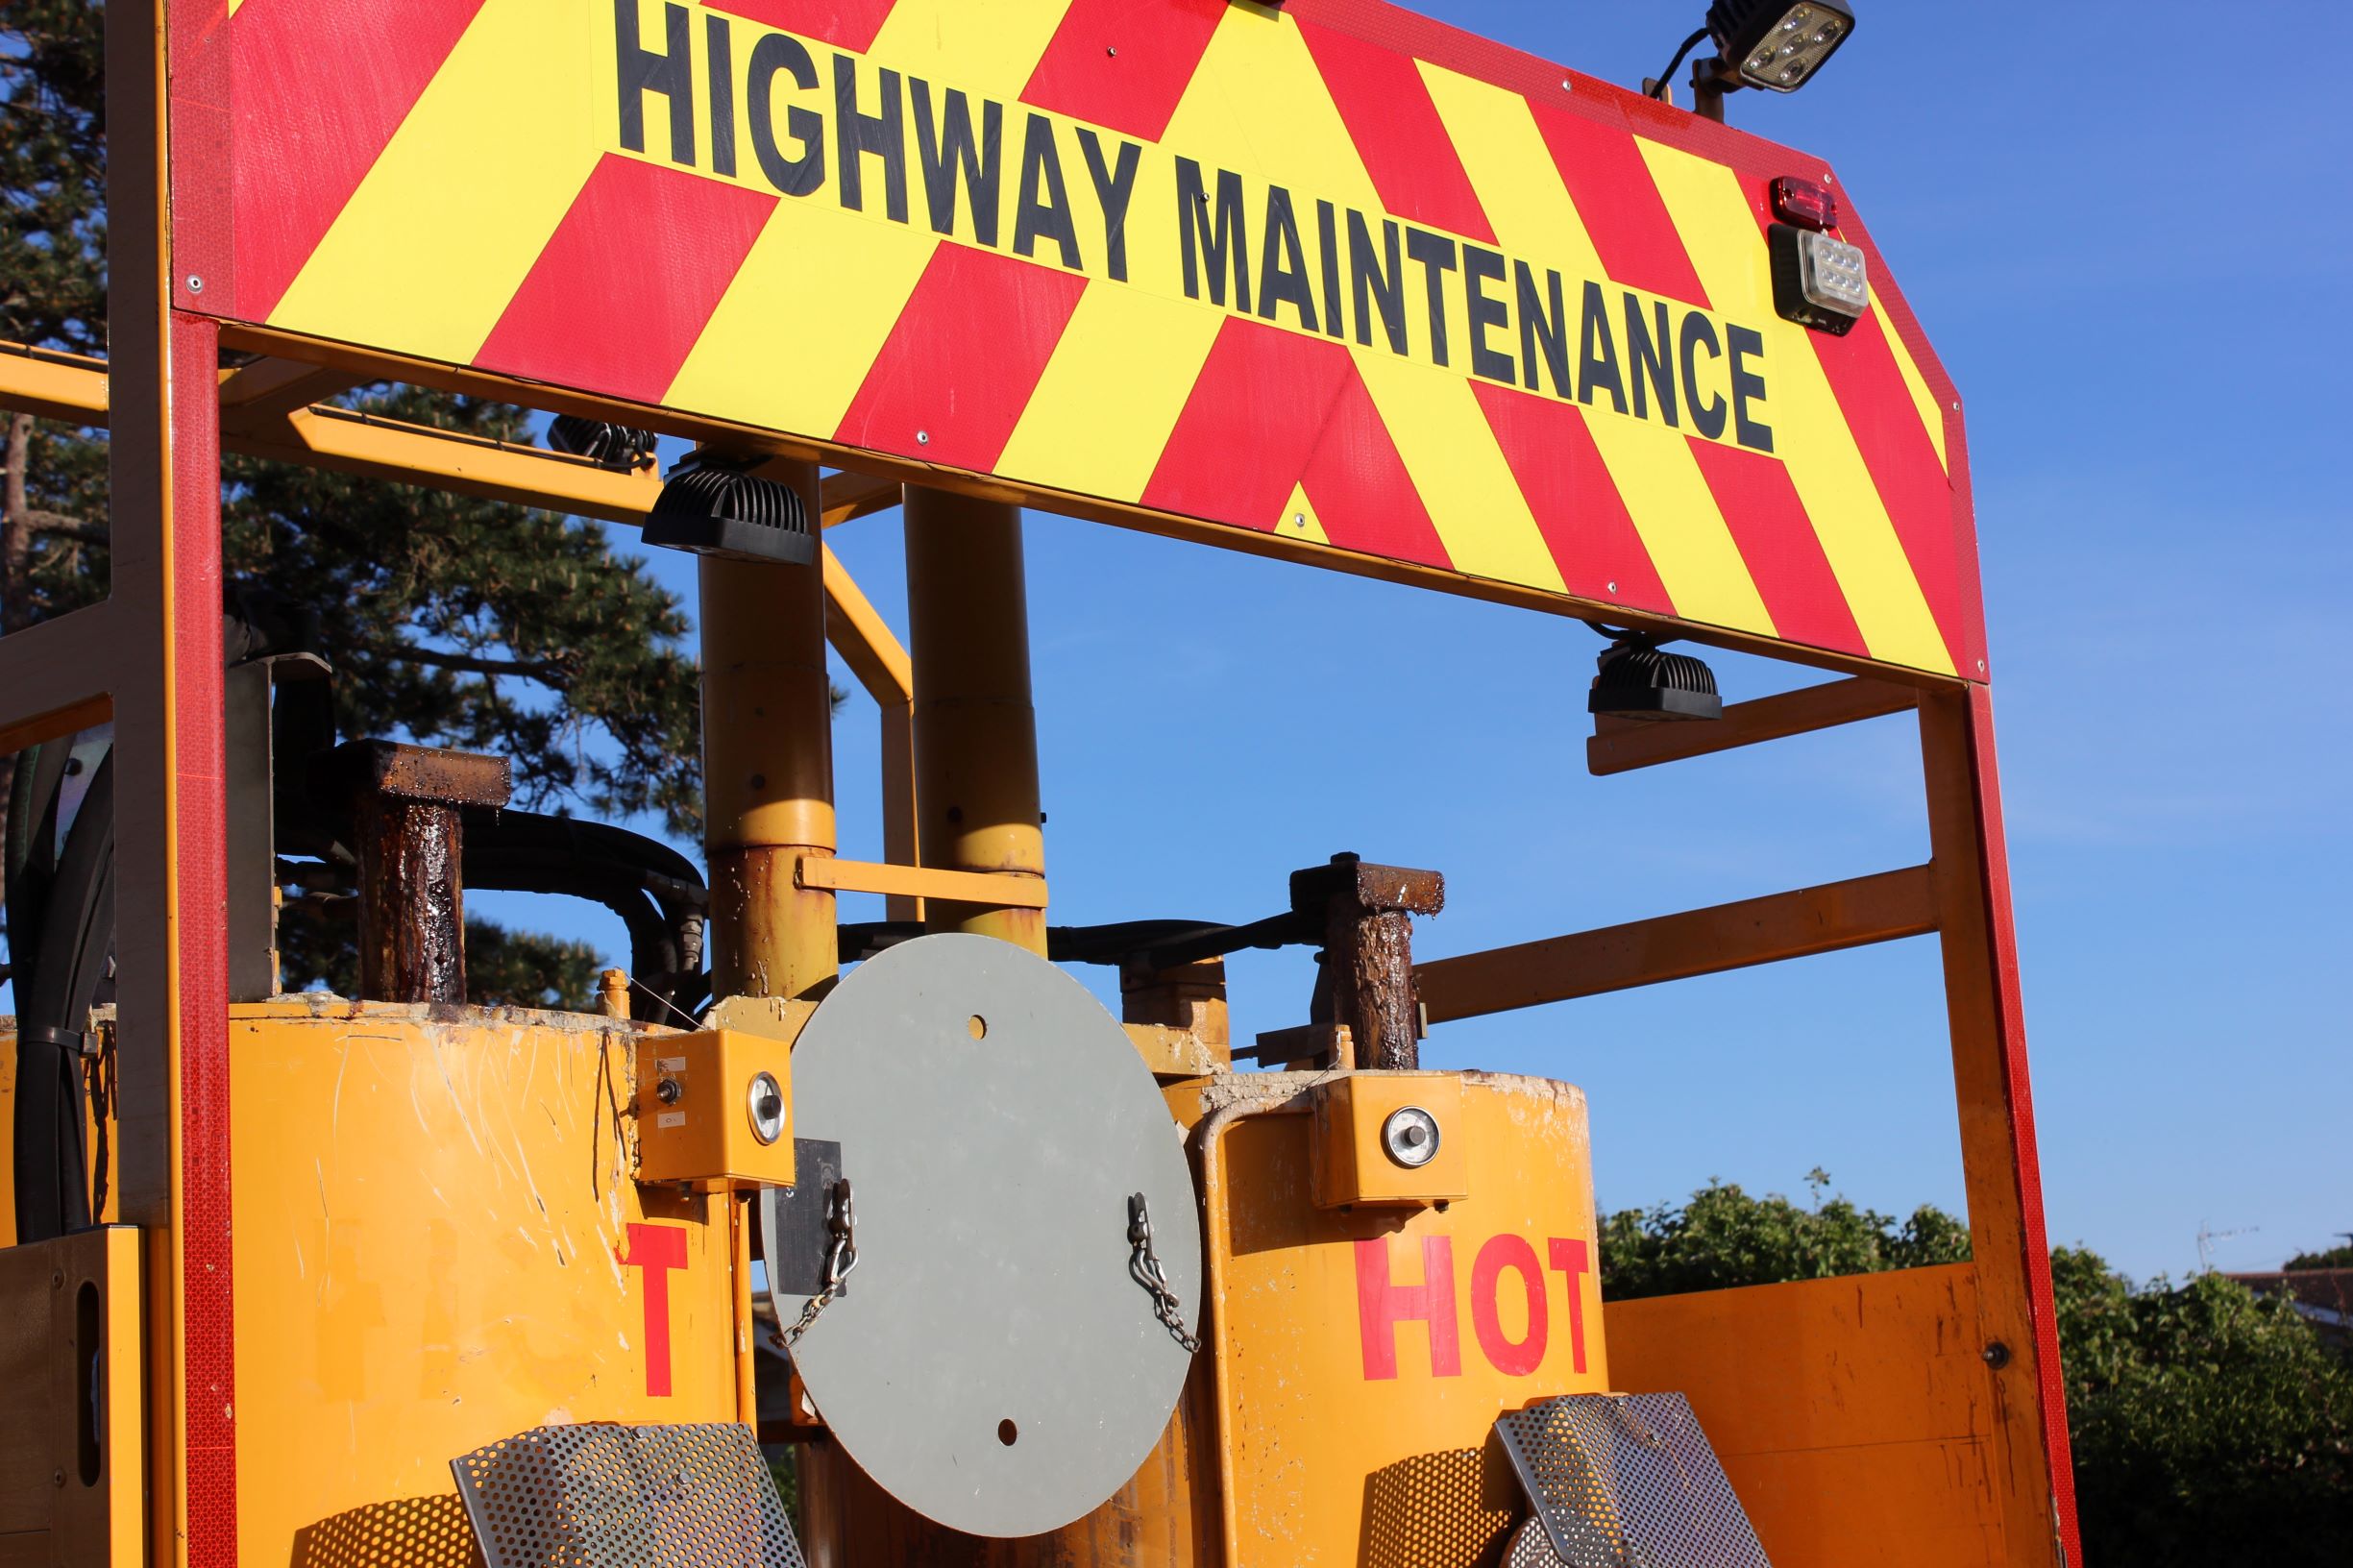 Photo showing reverse of maintenance lorry with highway maintenance sign and equipment